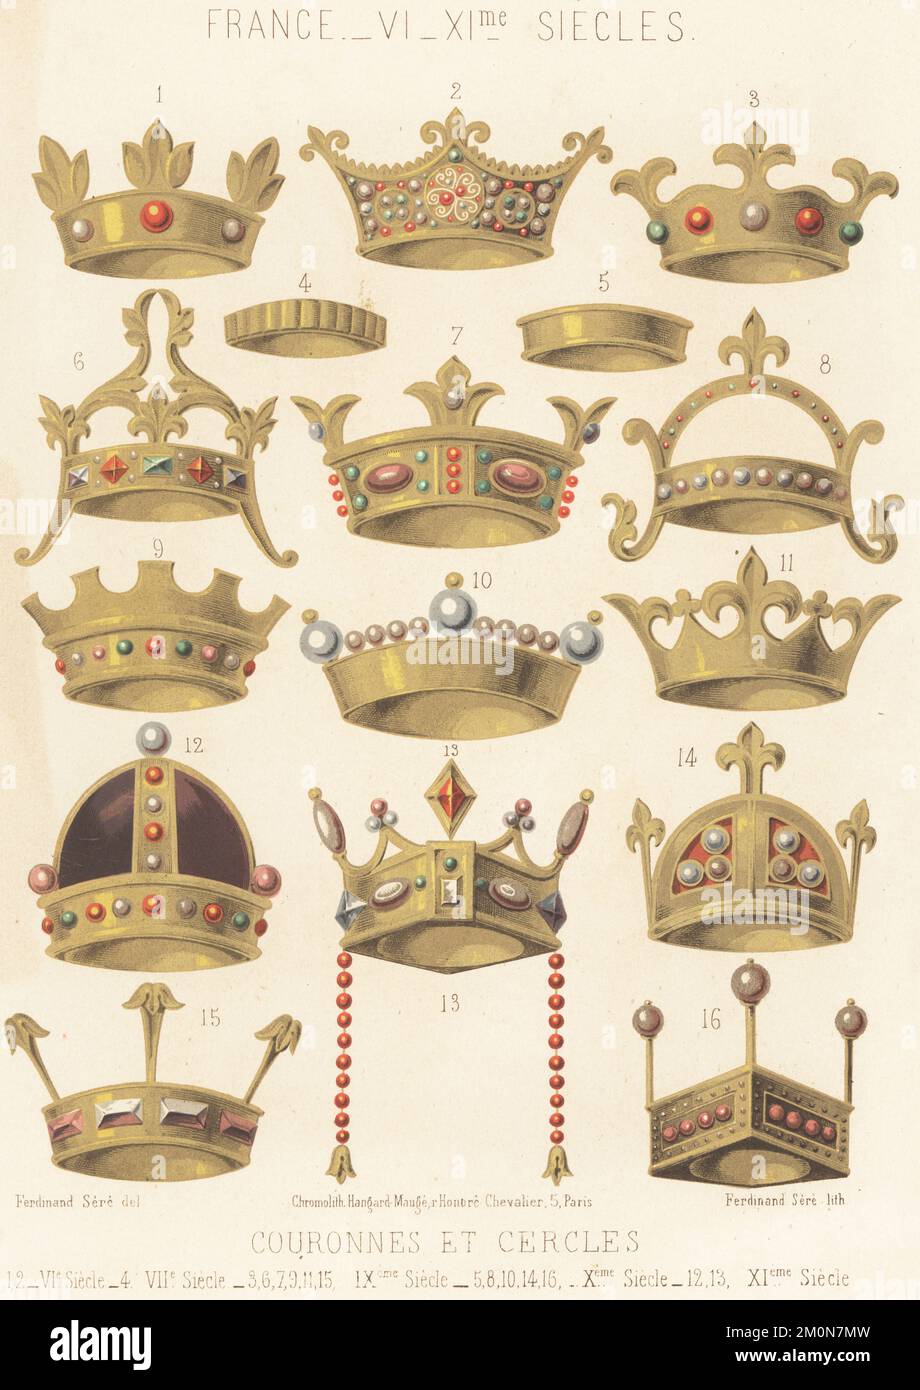 French crowns and diadems, 6th to 11th century. Crown of Pabo Post Prydain (Britons) 1, Fredegund 2, prince 3, princess 4, queen 5, Charles the Bald 6, Lothair 7, prince 8, Carloman I 9, king 10, Charlemagne 11, prince 12, queen 13, king 14, Charles the Bald 15, and a king 16. Couronnes et Cercles. France, VI - XIe siecles. Chromolithograph by Ferdinand Sere from Charles Louandre’s Les Arts Somptuaires, The Sumptuary Arts, Hangard-Mauge, Paris, 1858. Stock Photo